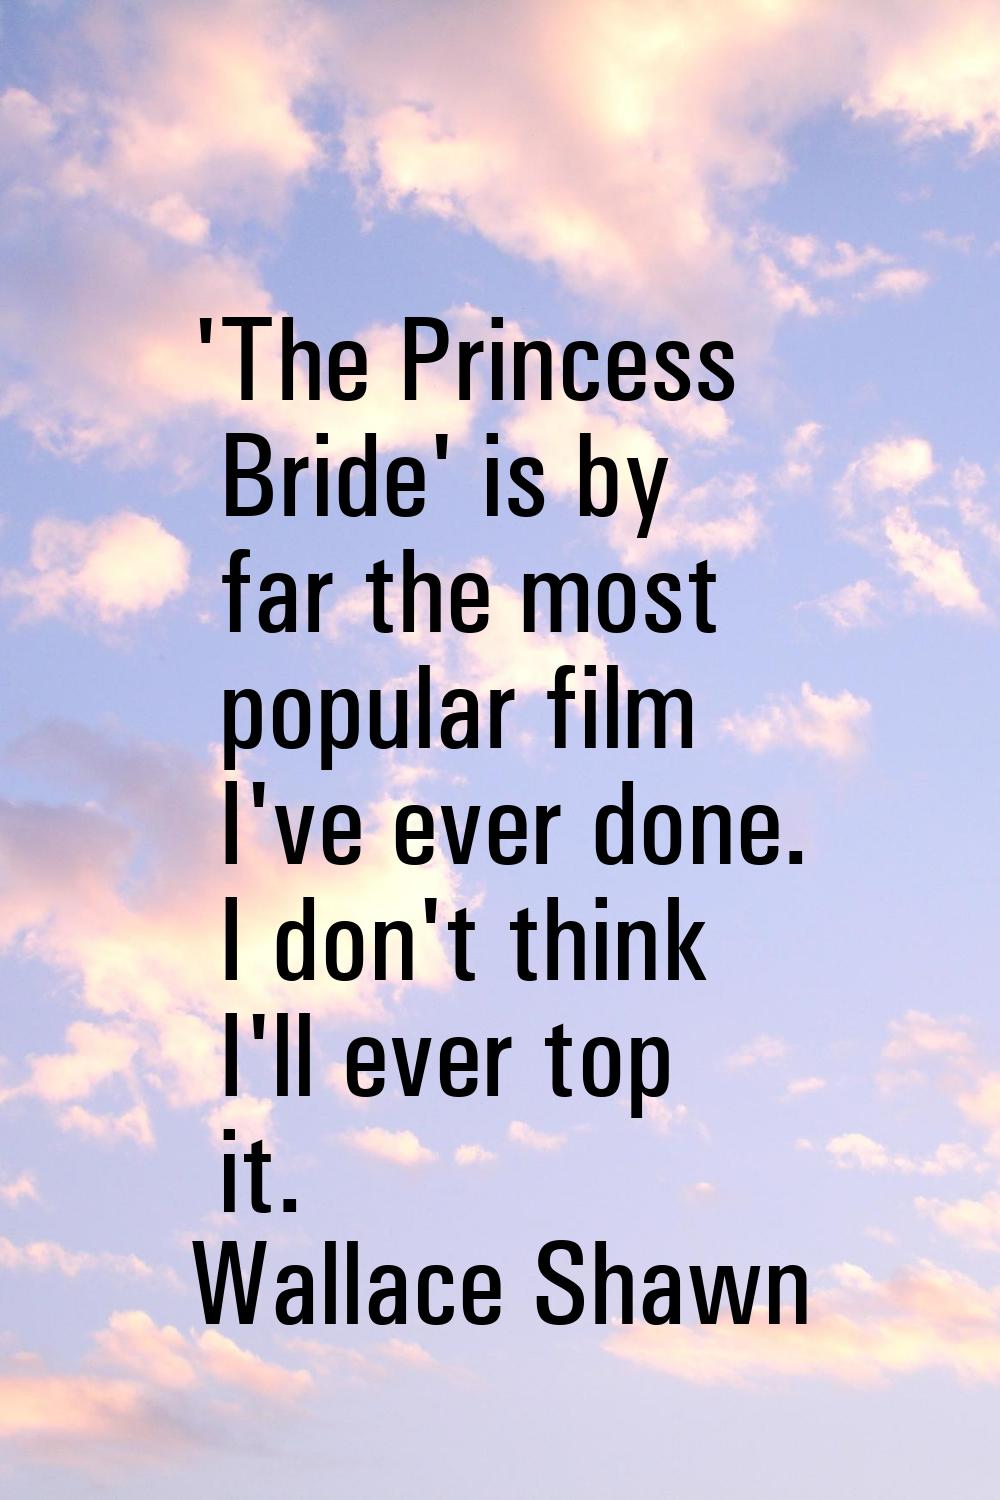 'The Princess Bride' is by far the most popular film I've ever done. I don't think I'll ever top it